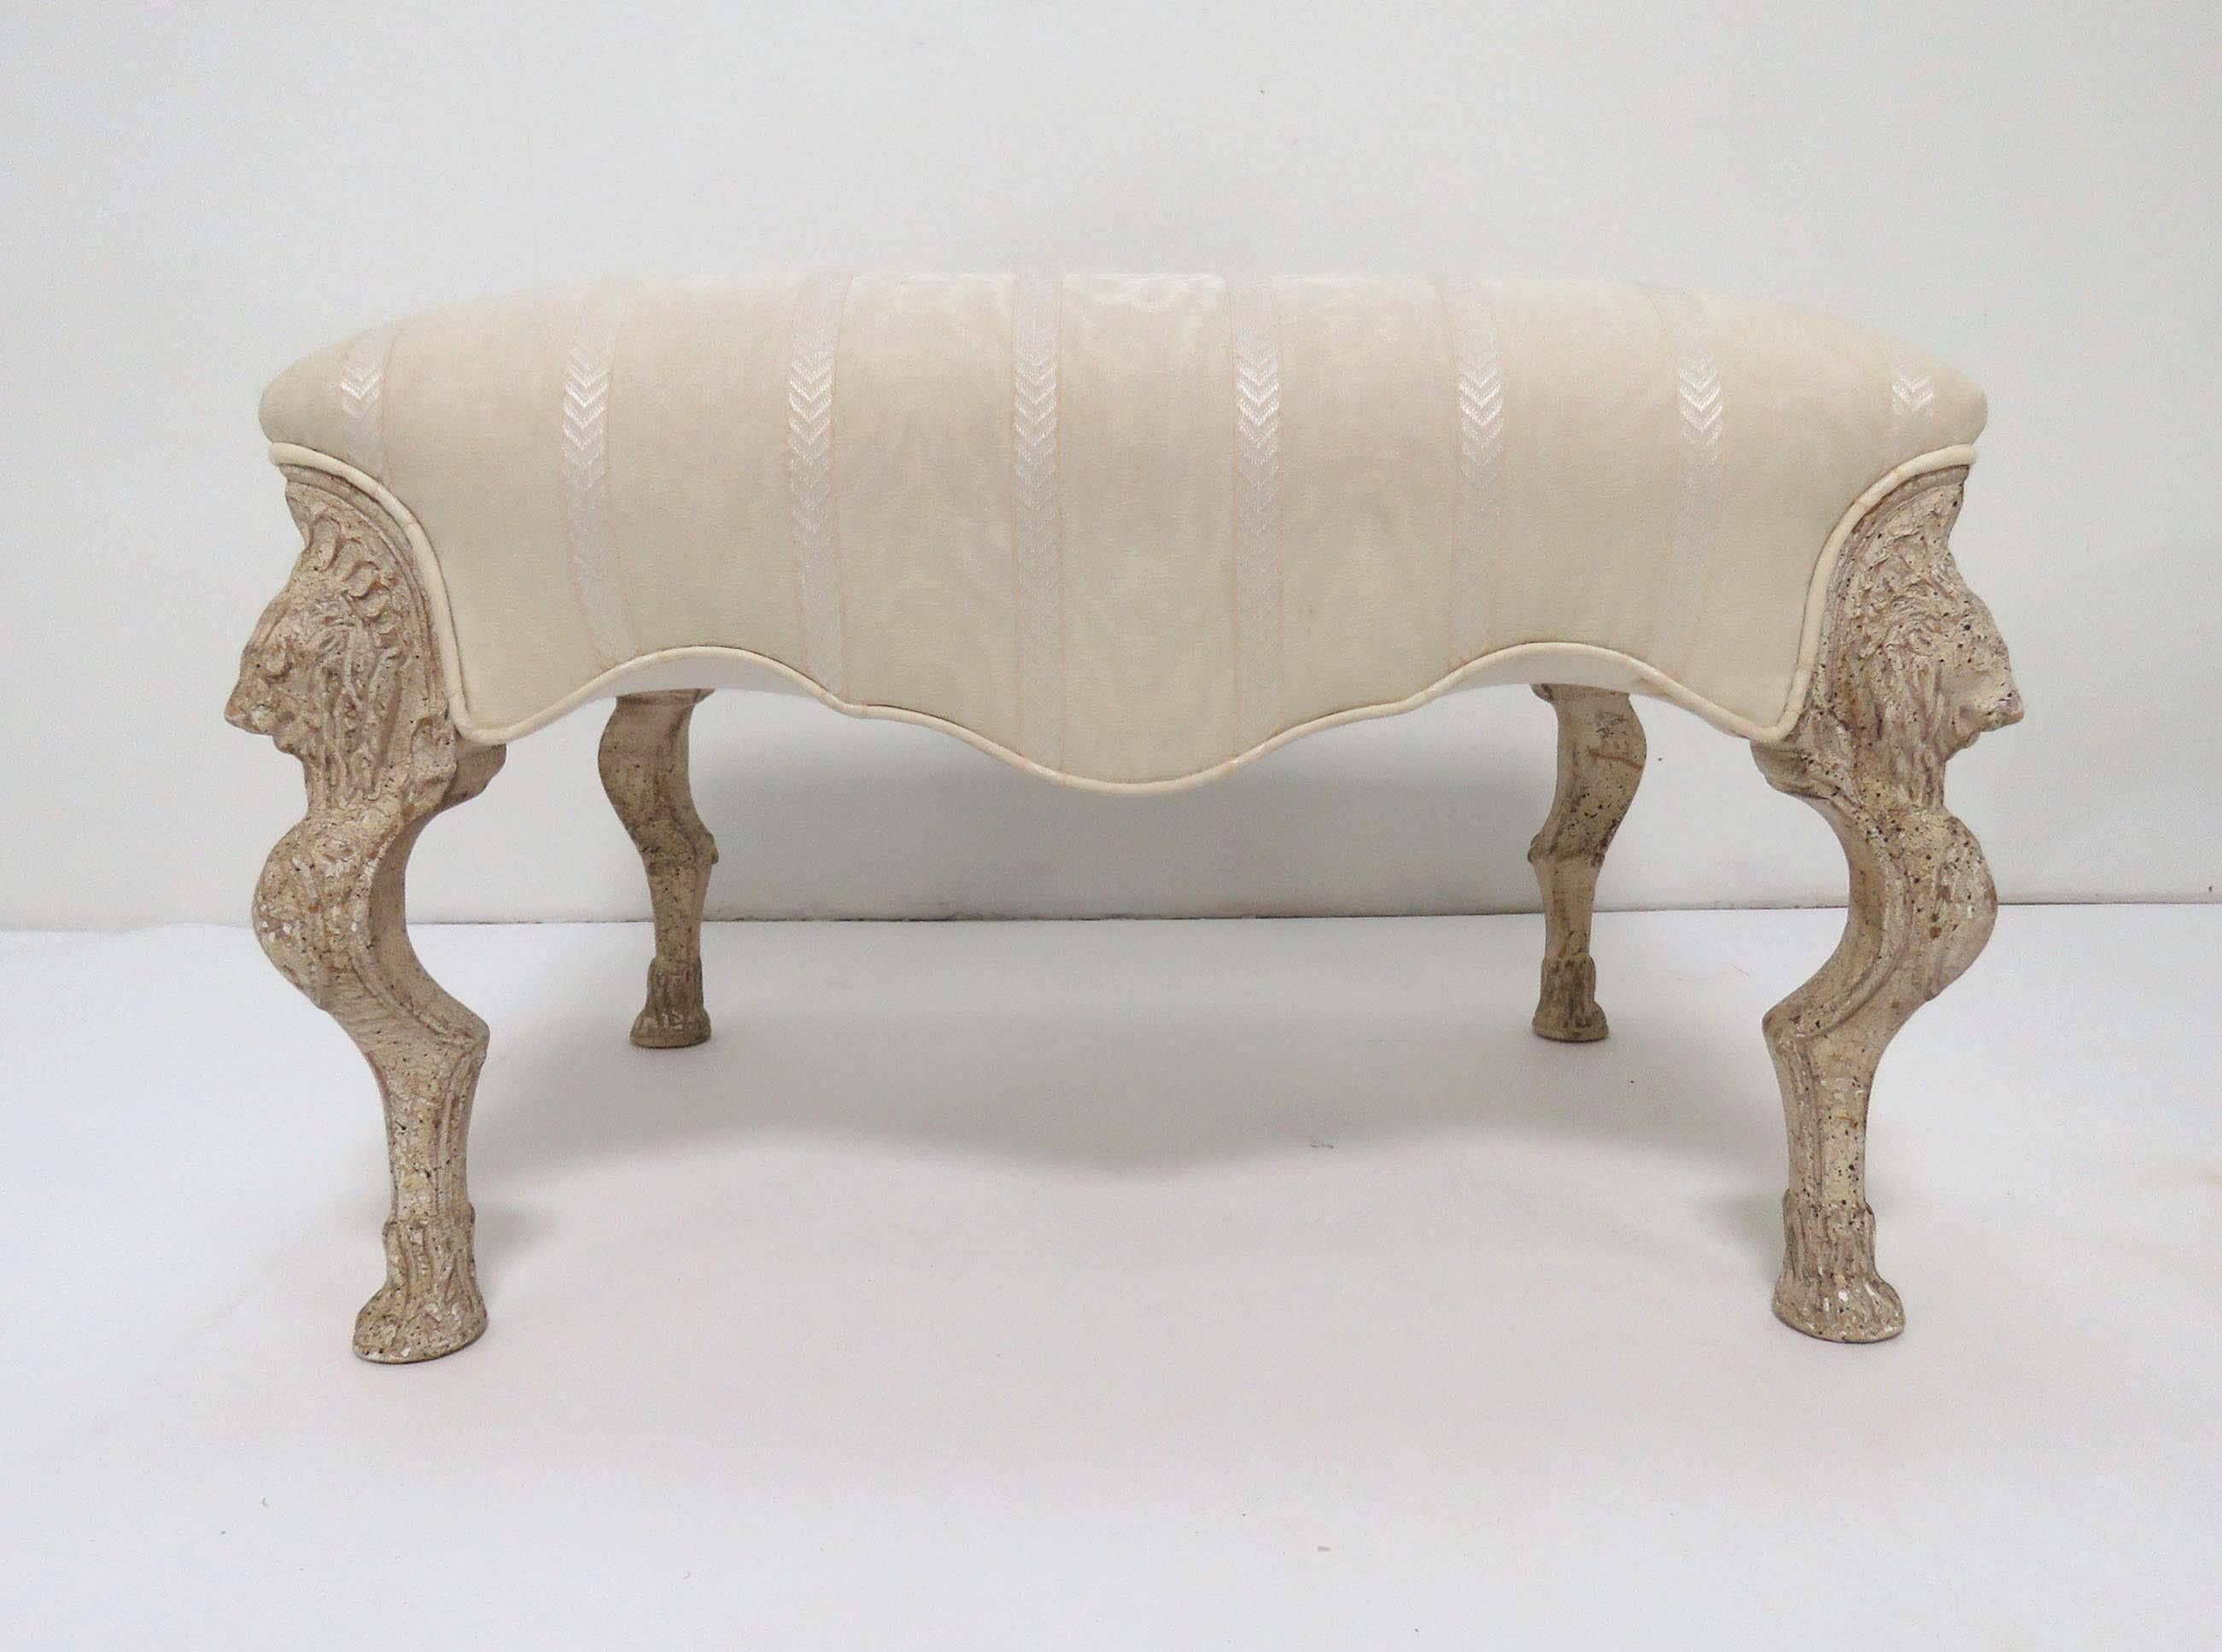 Pair of generously proportioned hassocks or ottomans in the manner of Louis Quinze. In limed finish with griffin carved legs and elegantly arched skirts.